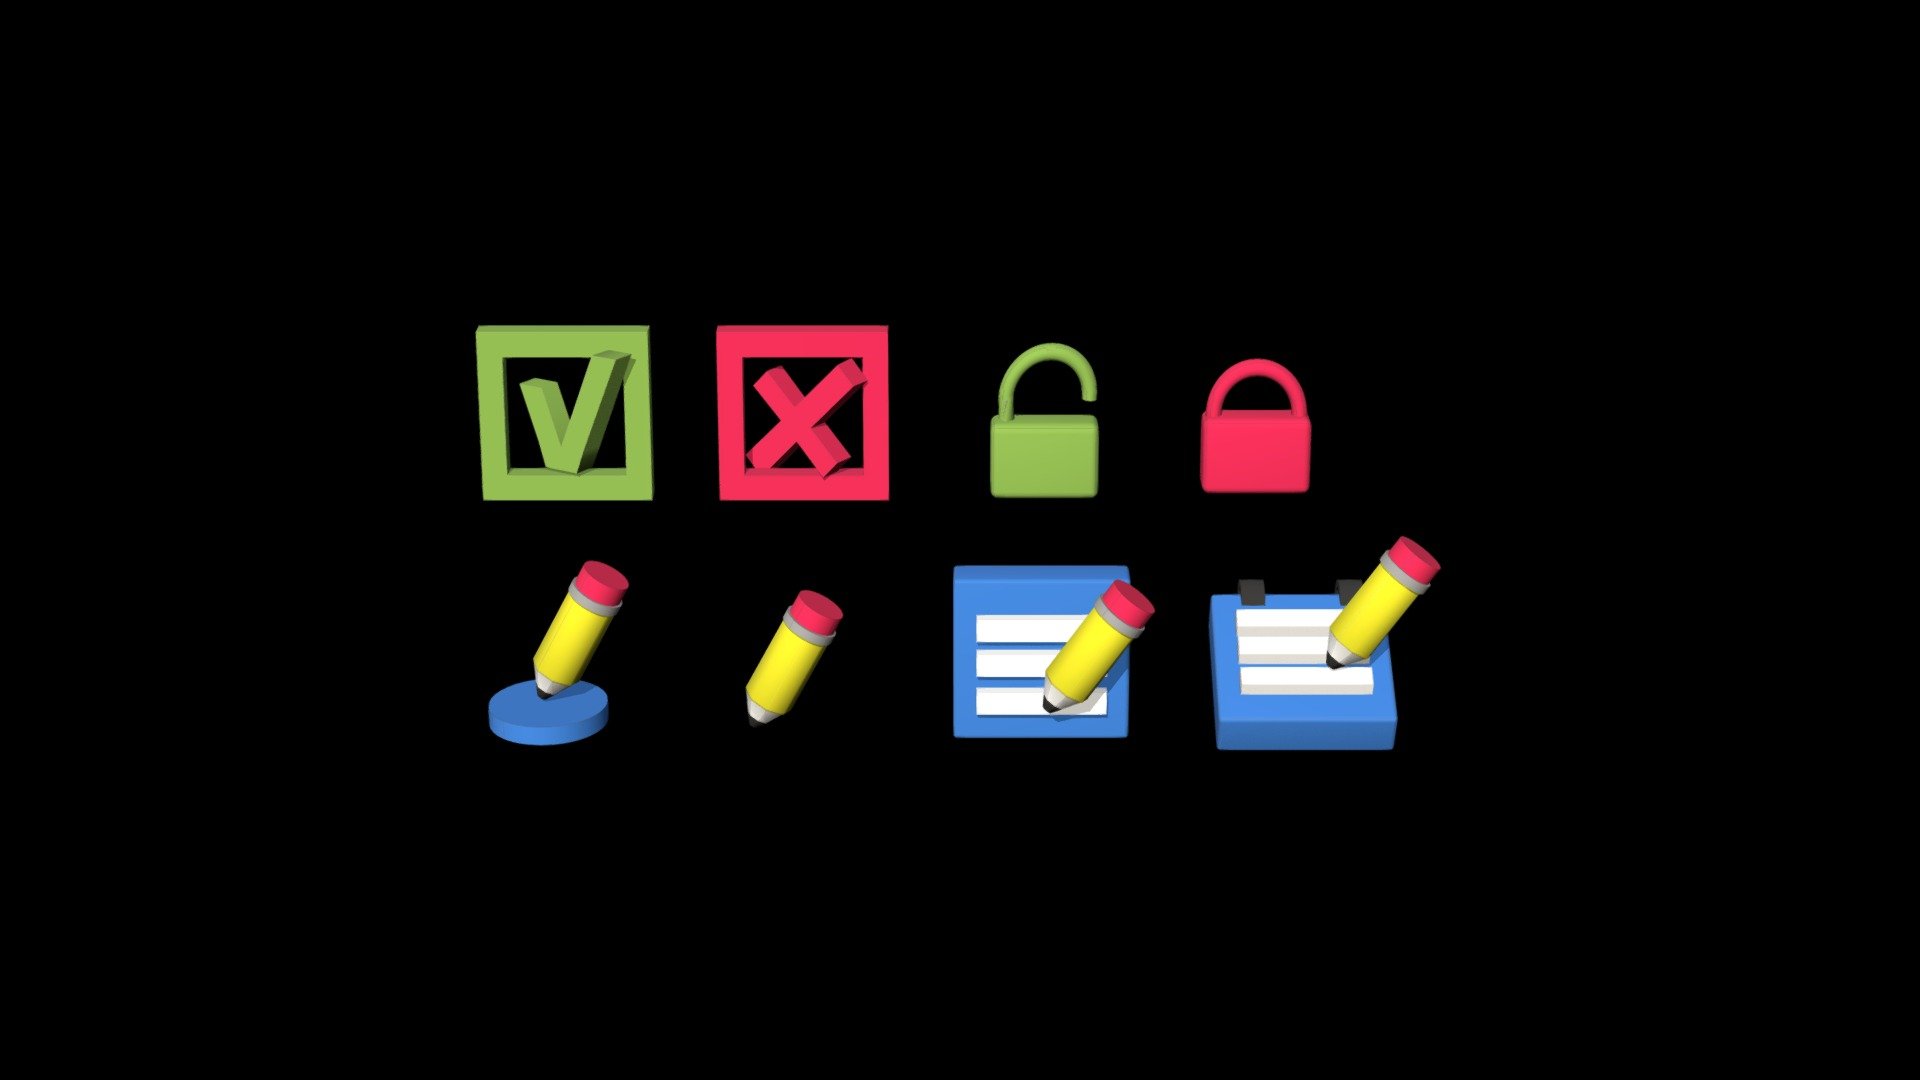 3D icons
Edit/ Note/ Lock/ Yes/ No - 3D icons _Notes - Download Free 3D model by Sparrow (@innasparrow) 3d model